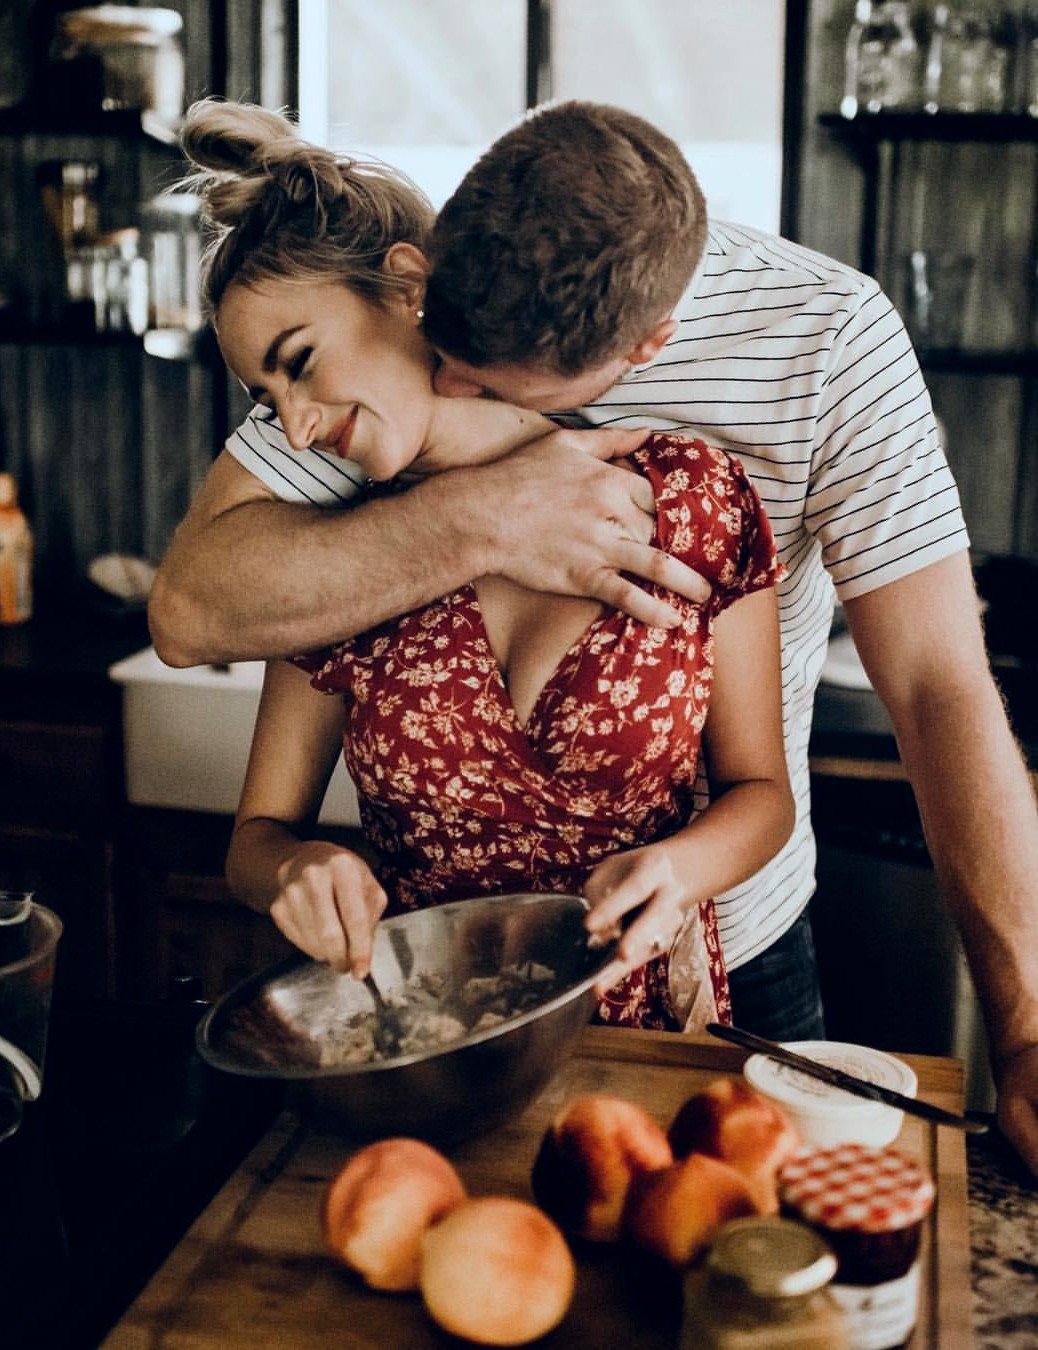 Couple Romance In Kitchen, Food, Tableware, Plant, Flash photography, Smile, Recipe